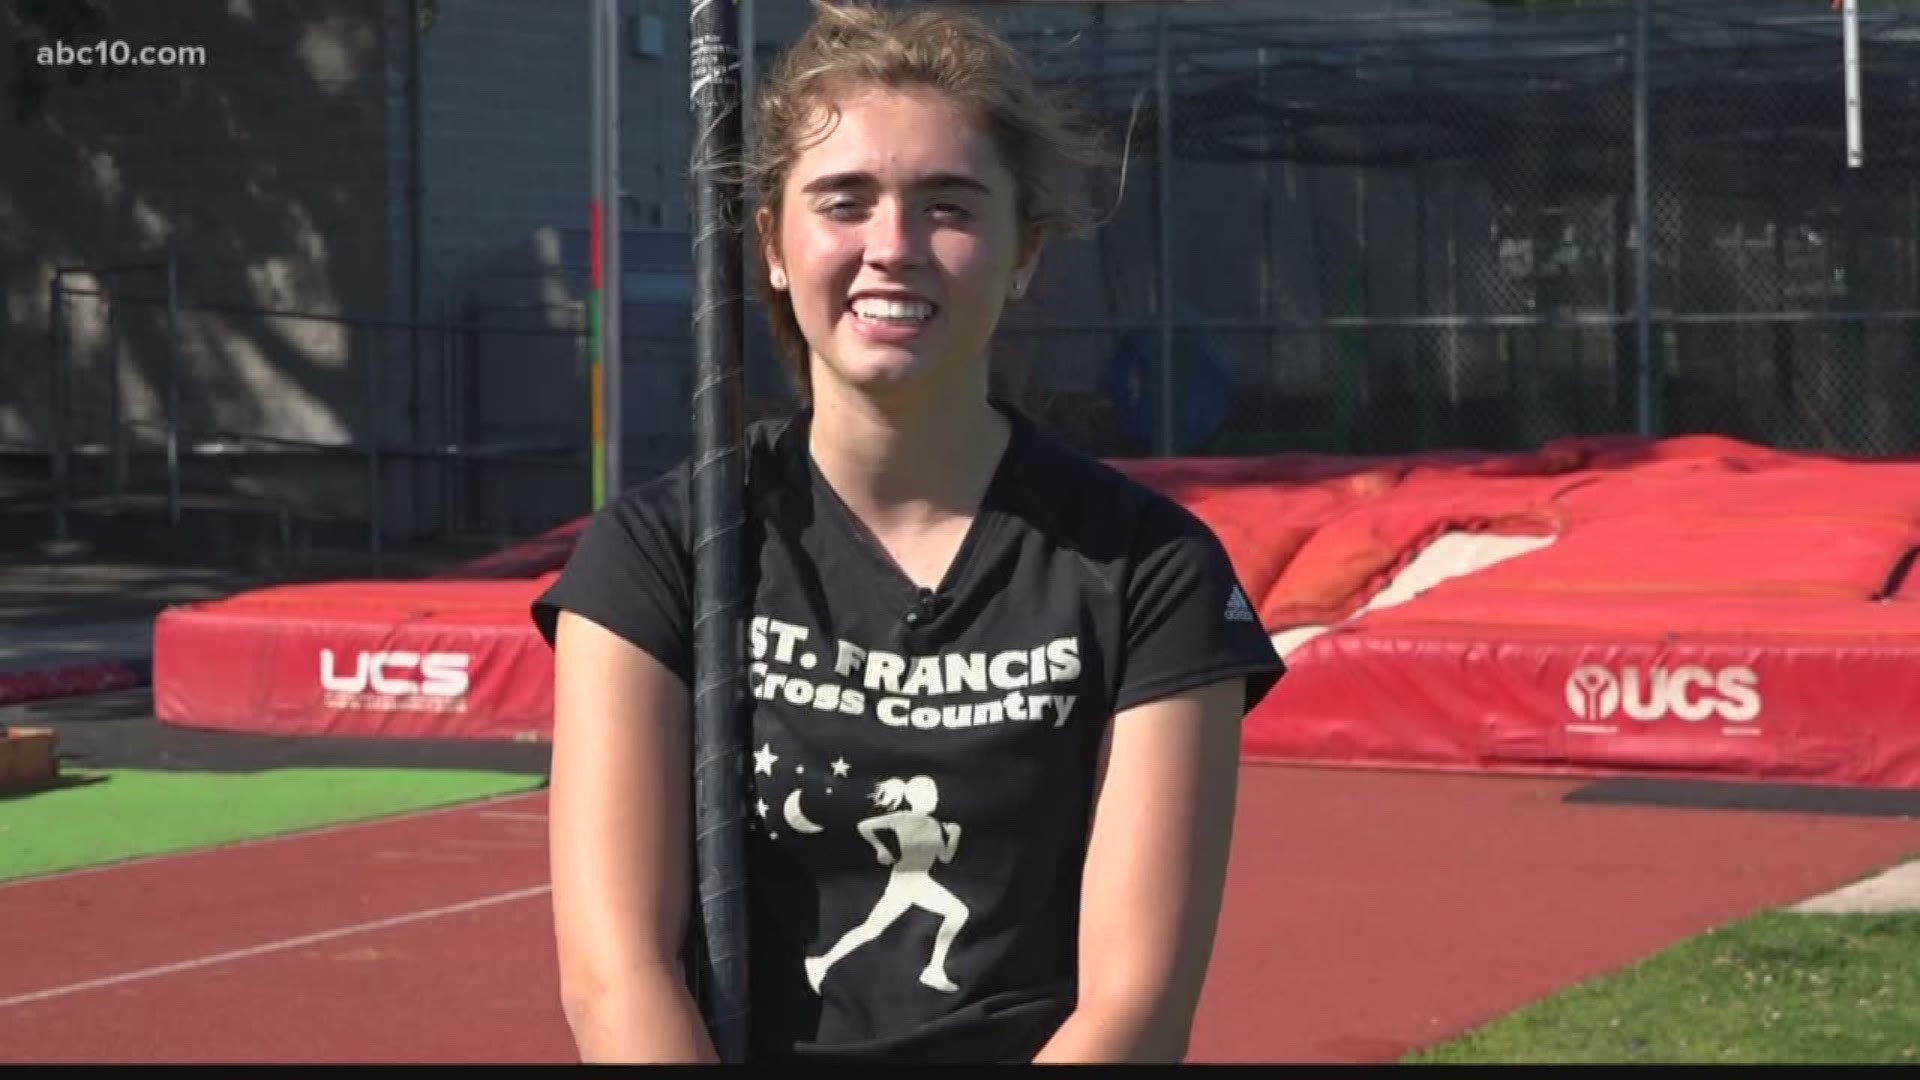 The St. Francis sophomore is starting to break records in a sport she took up one year ago, showing it's never too late to try new things.